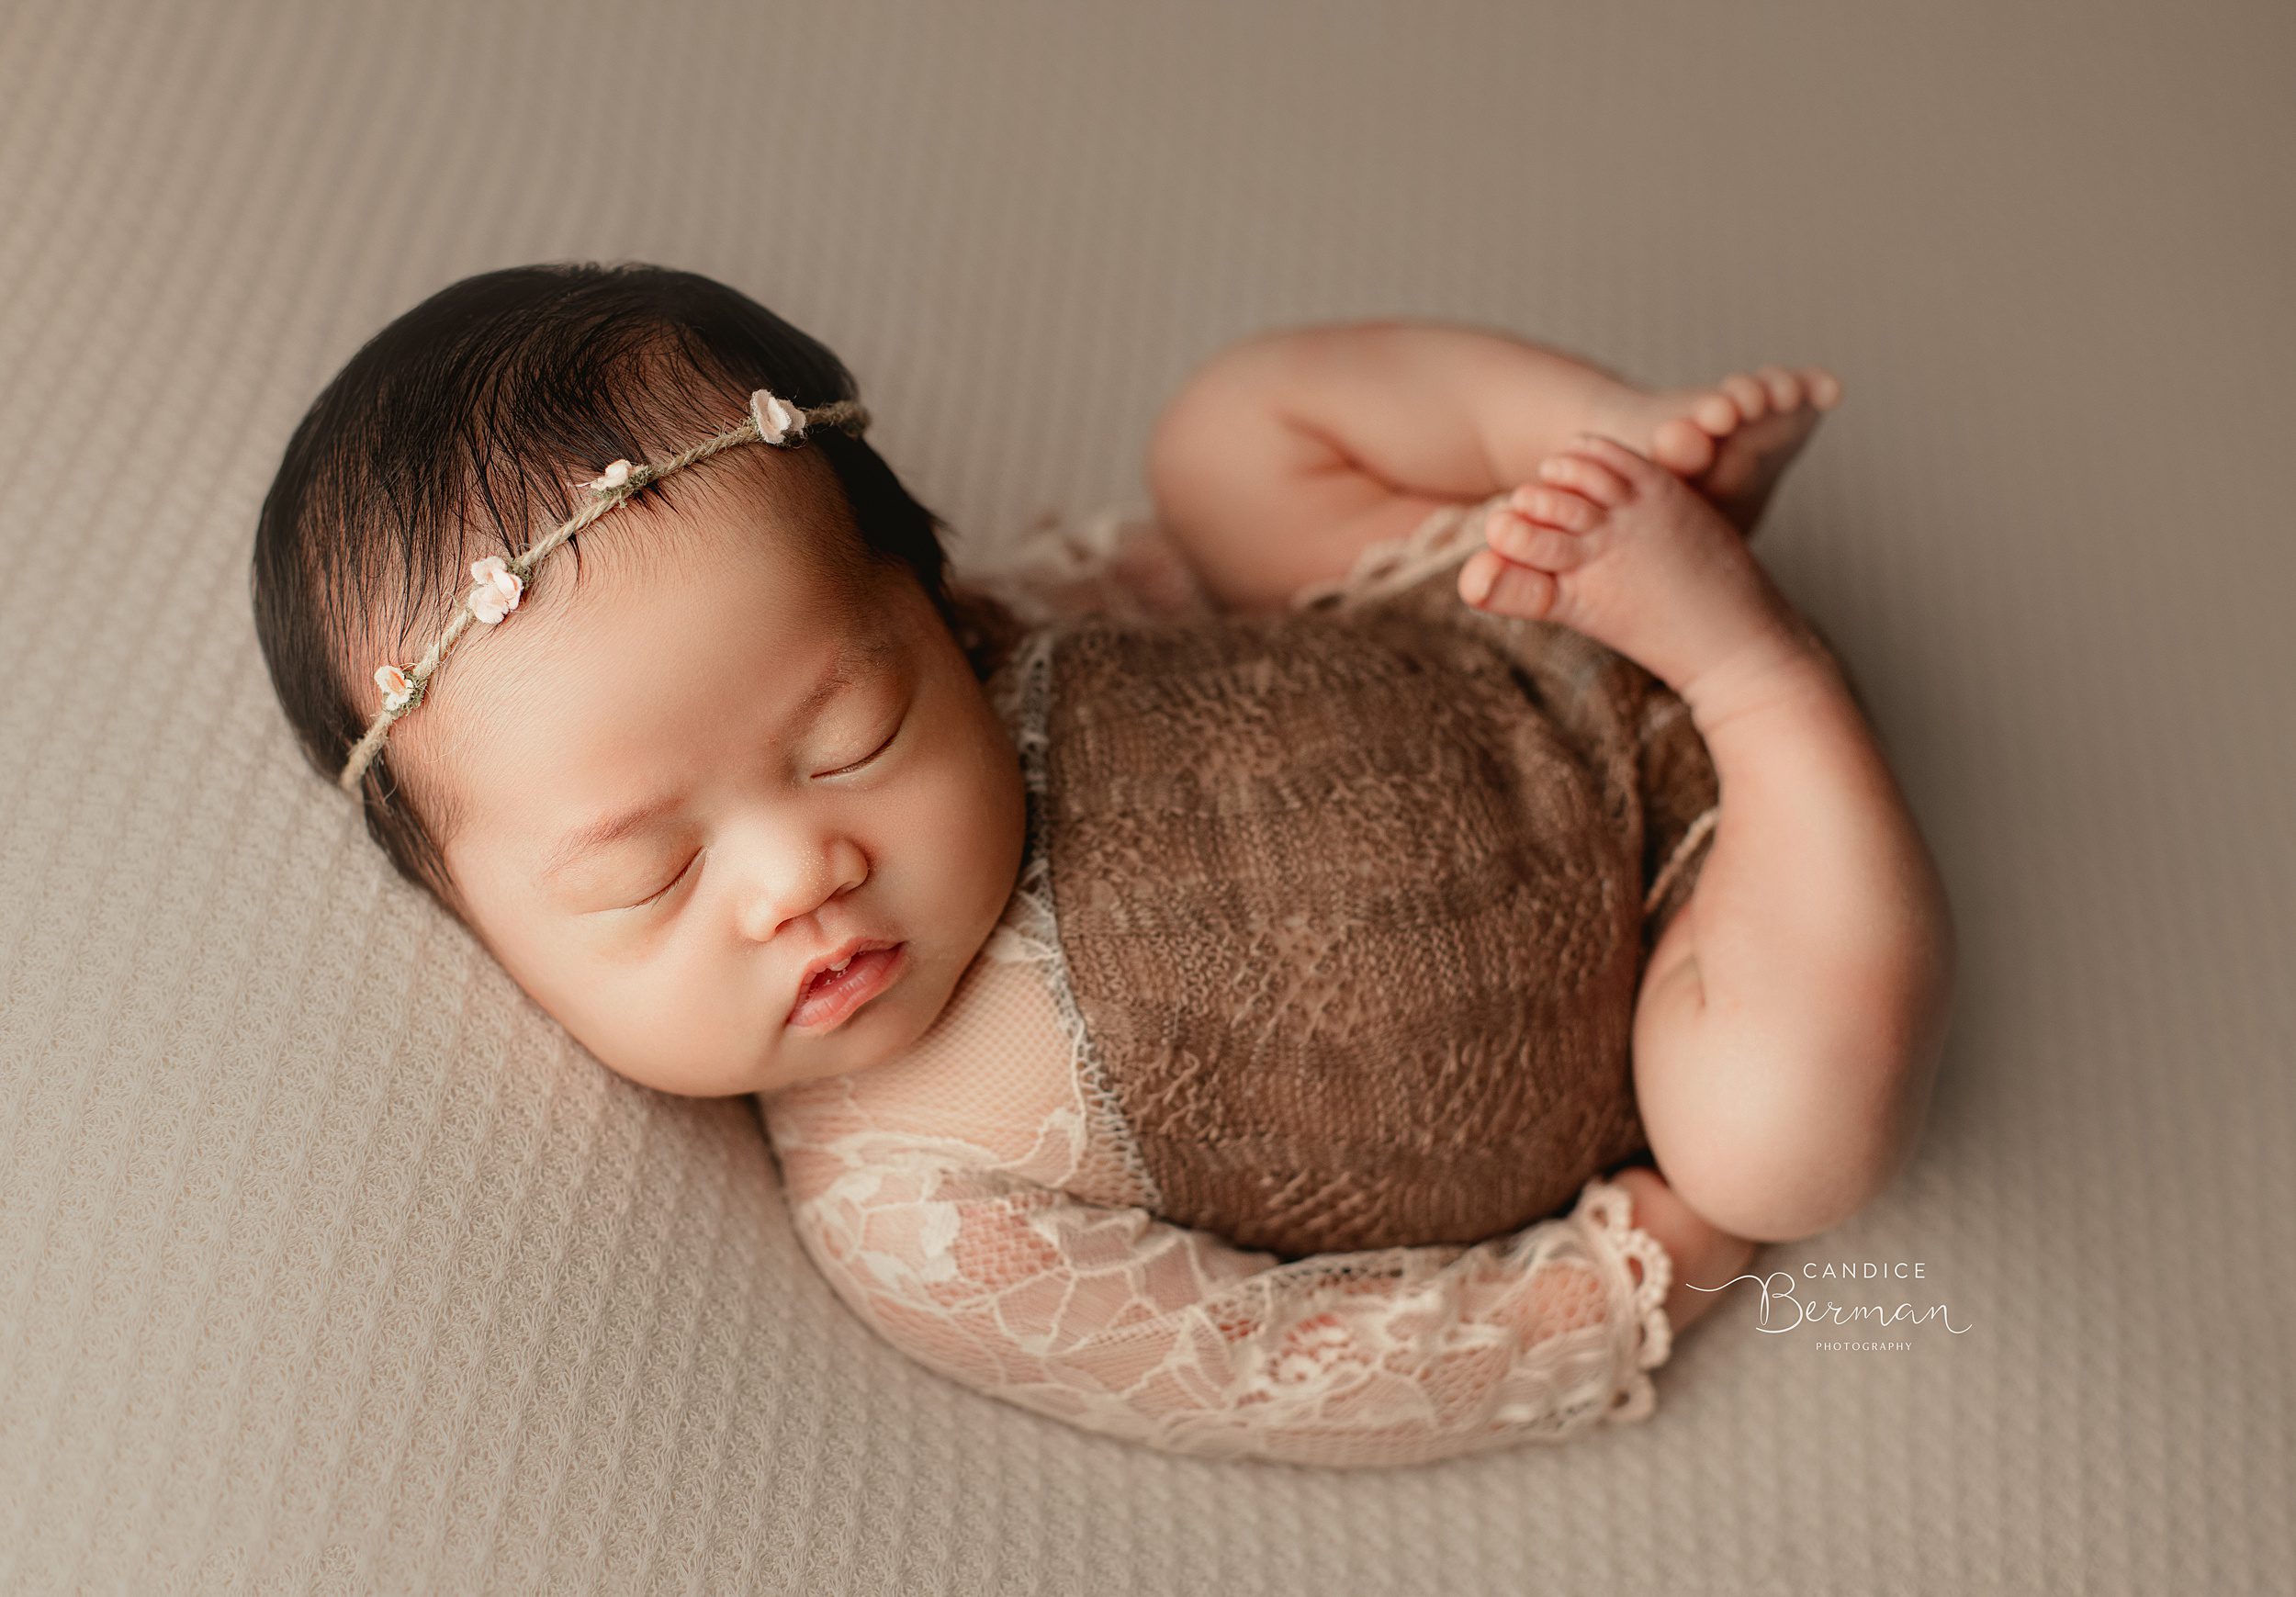 A newborn baby sleeps in a bed in a lace onesie in a studio